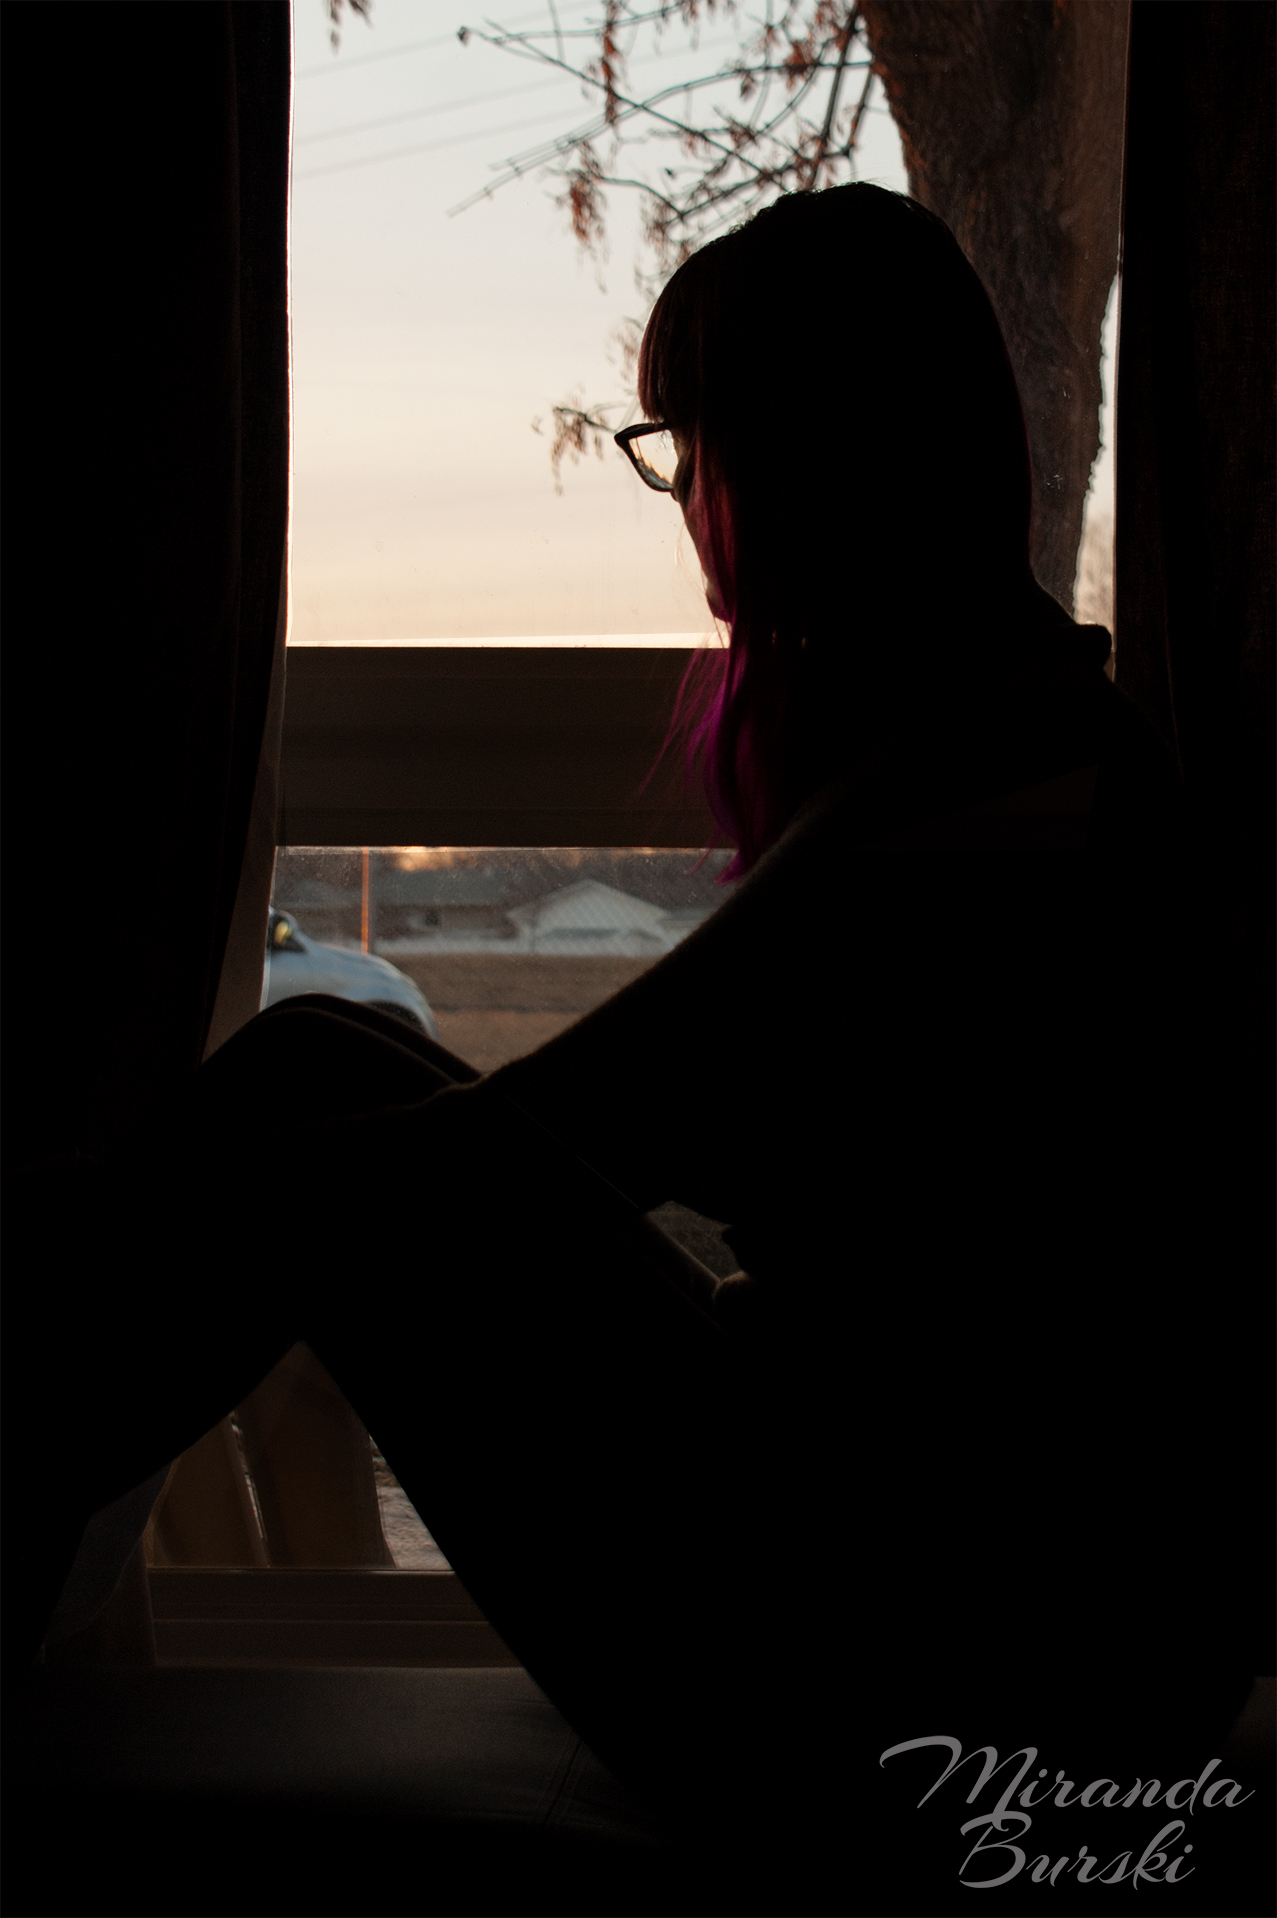 A woman sitting in a window, silhouetted by a sunset.